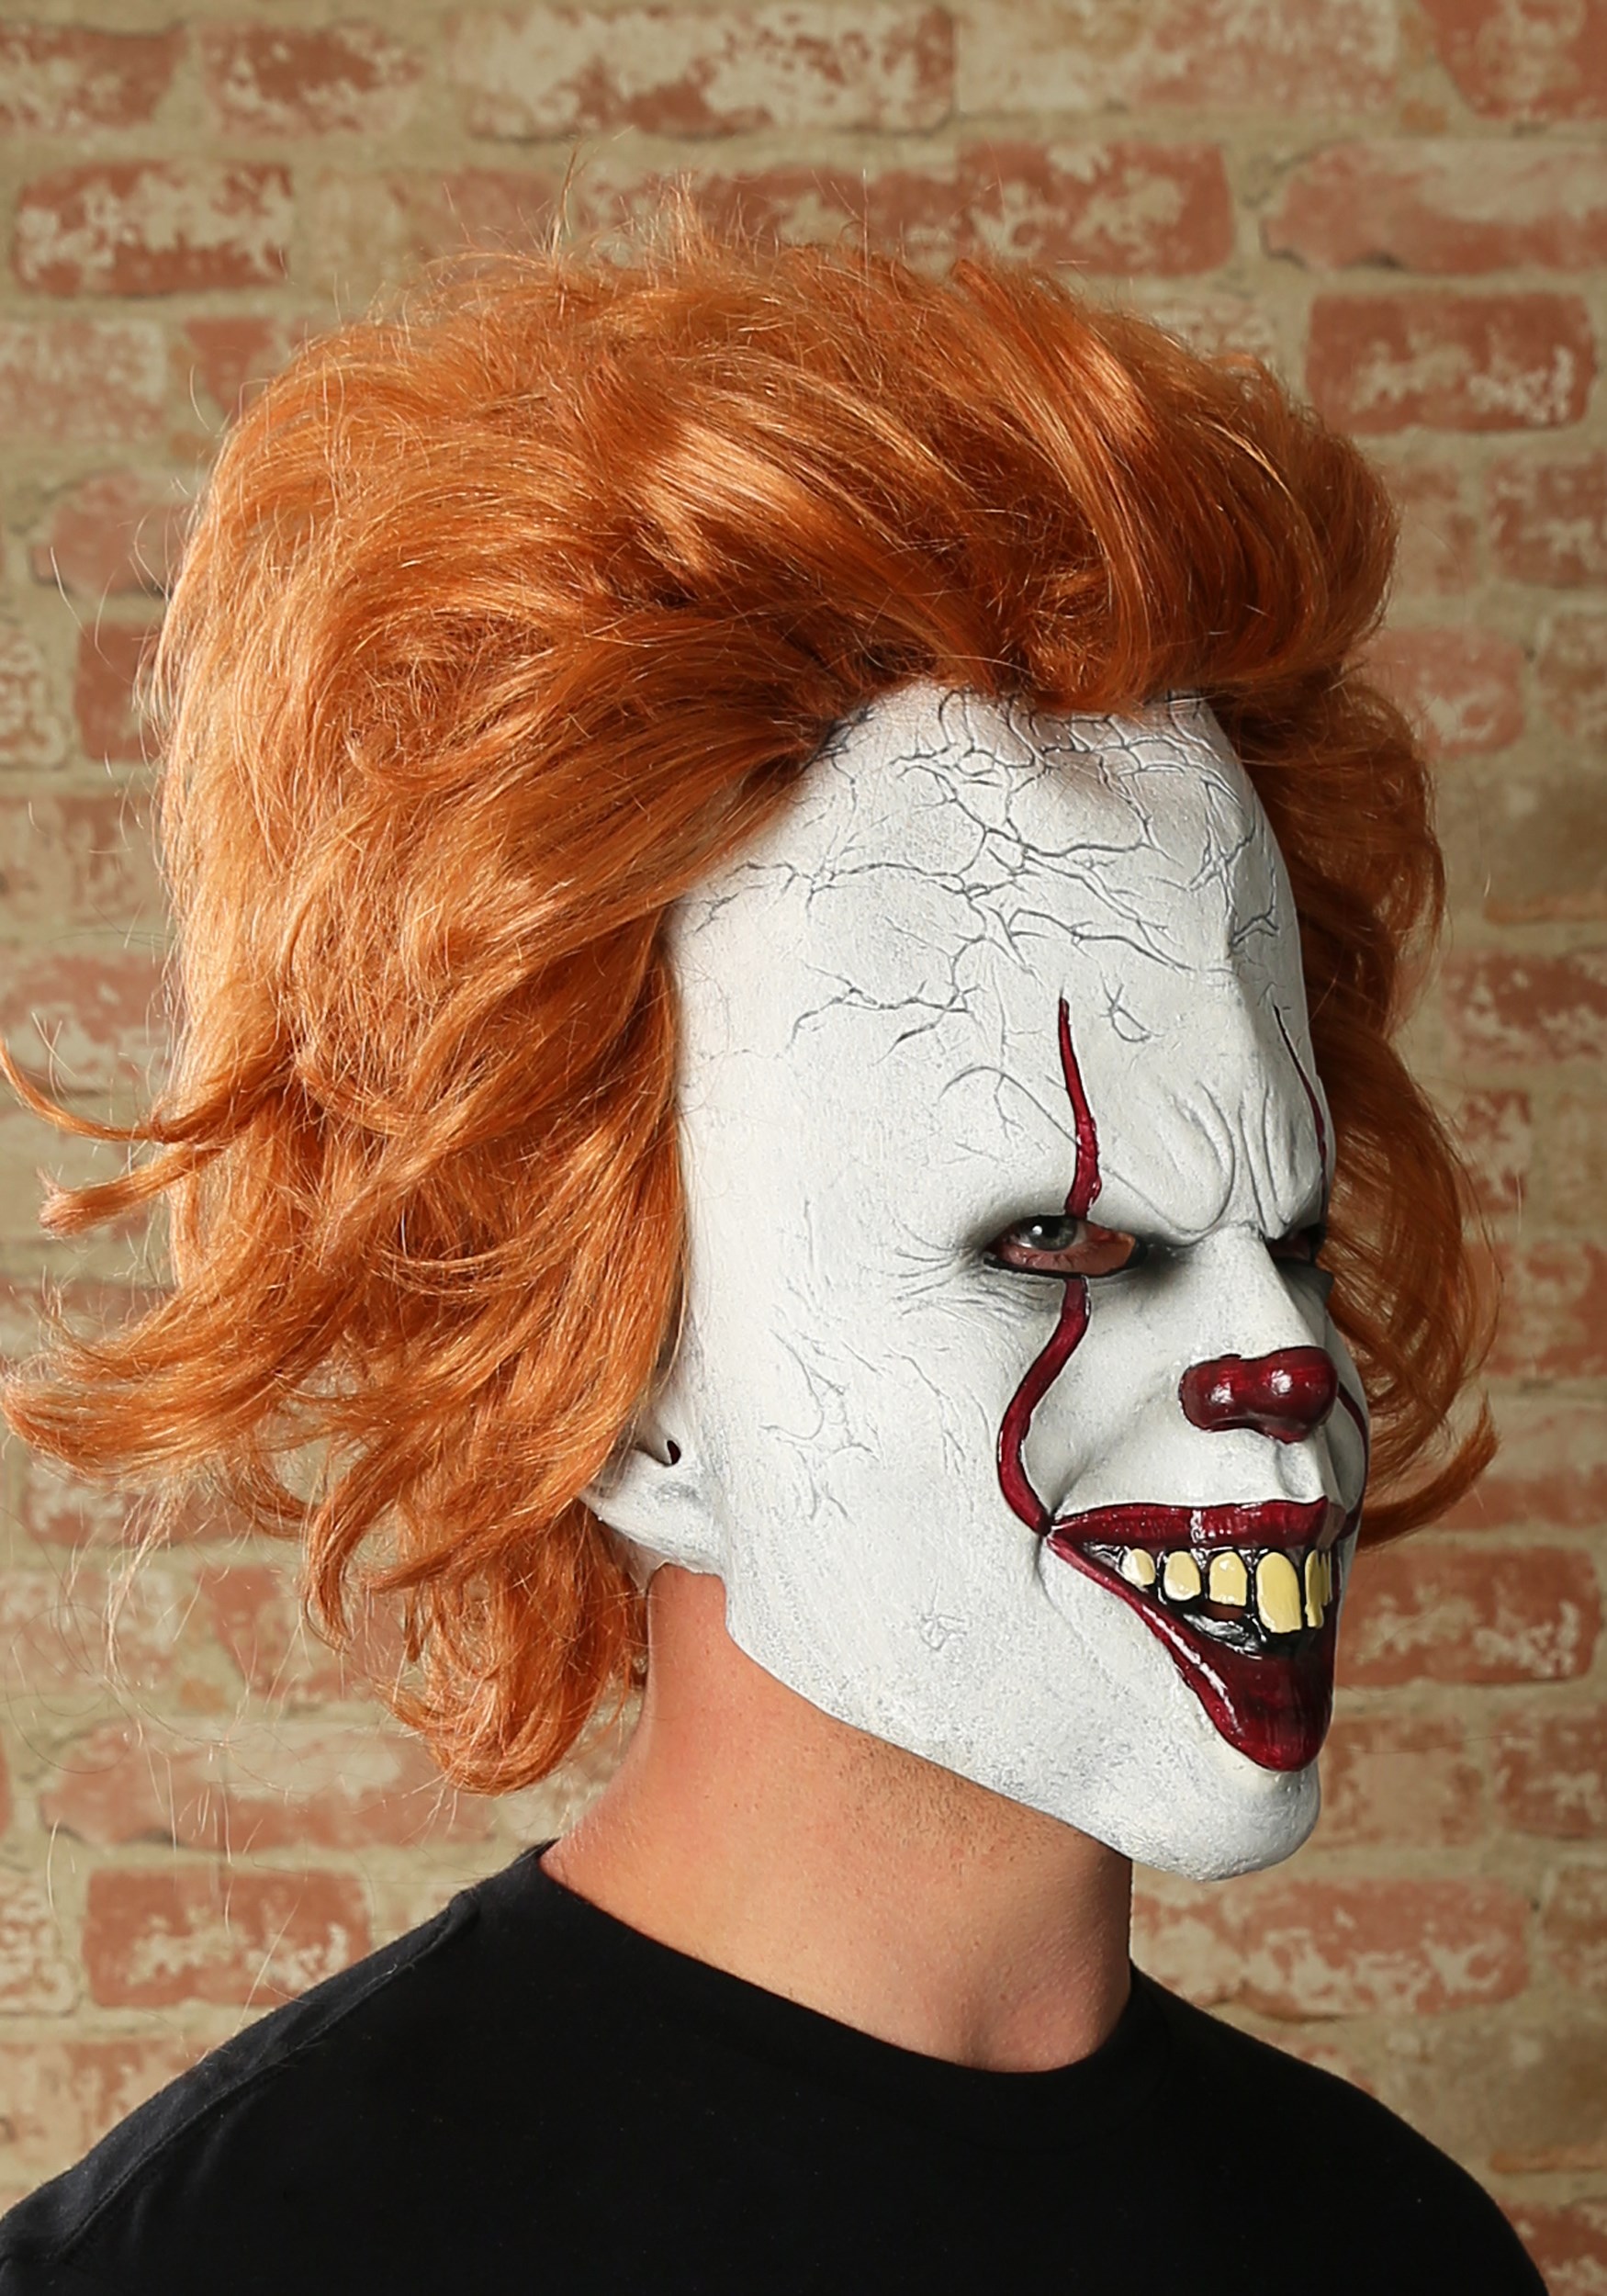 kolbe Børnepalads erindringer IT Movie Pennywise Deluxe Mask for Adults